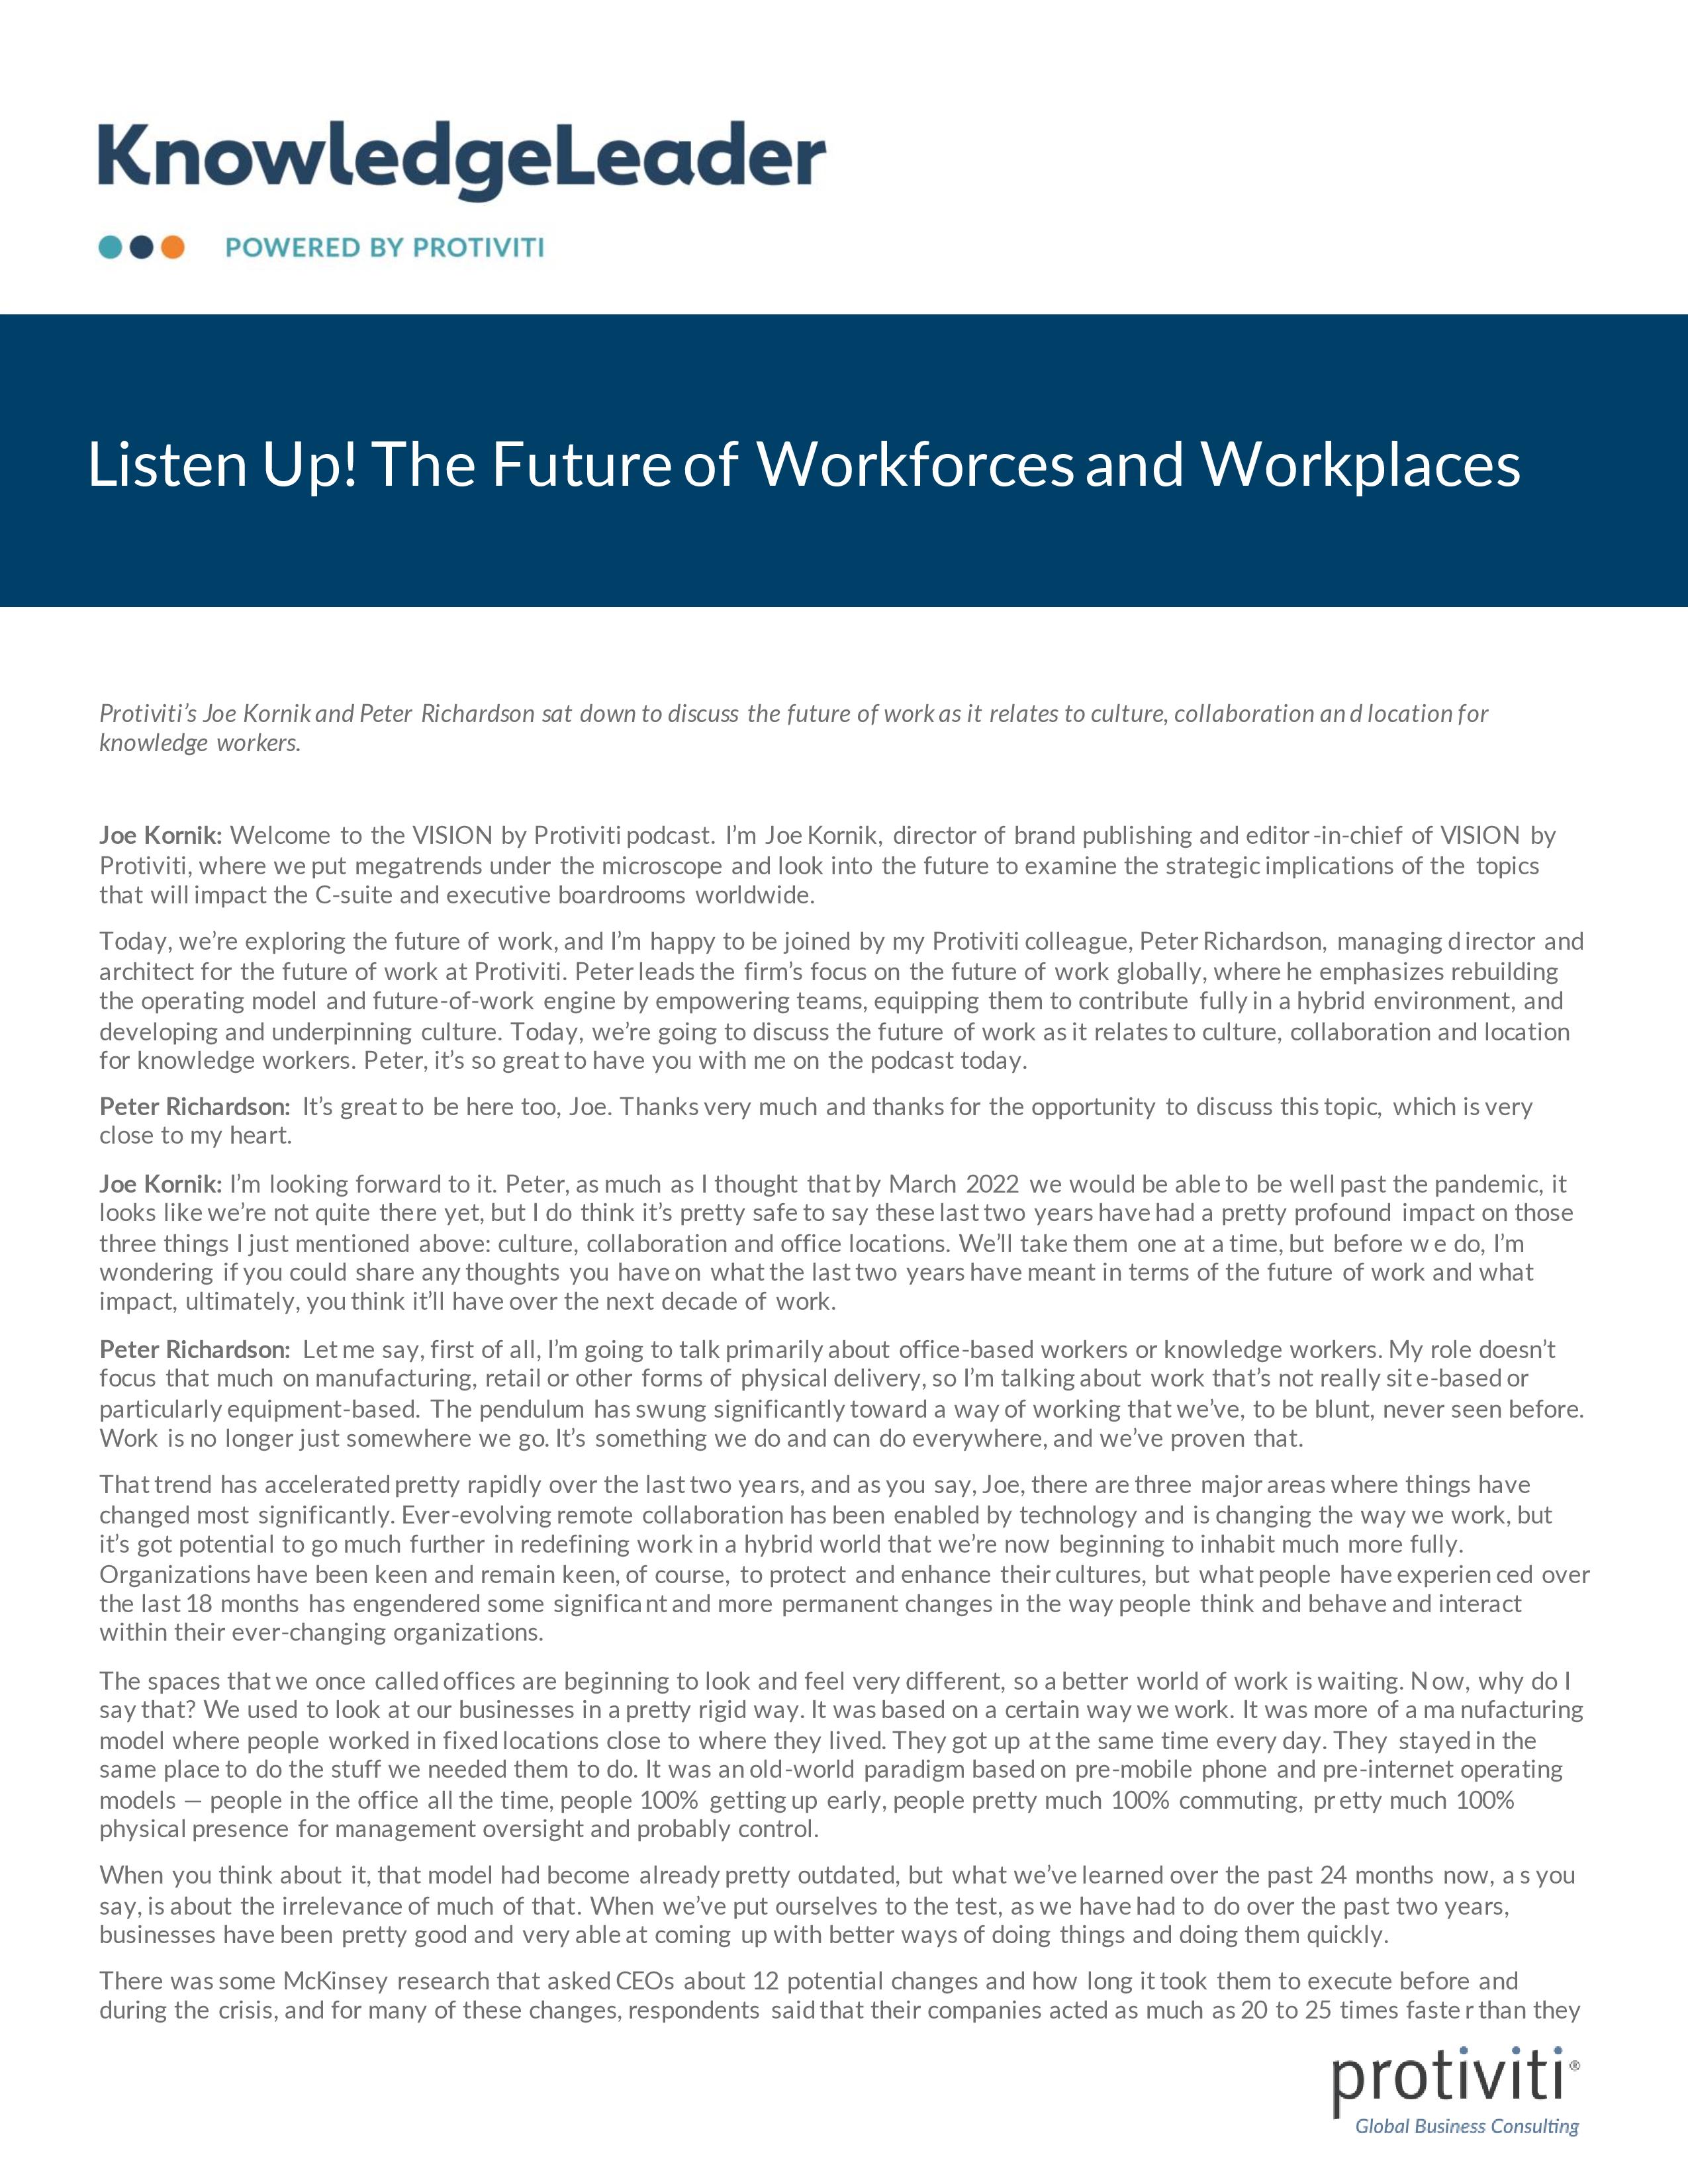 Screenshot of the first page of Listen Up! The Future of Workforces and Workplaces